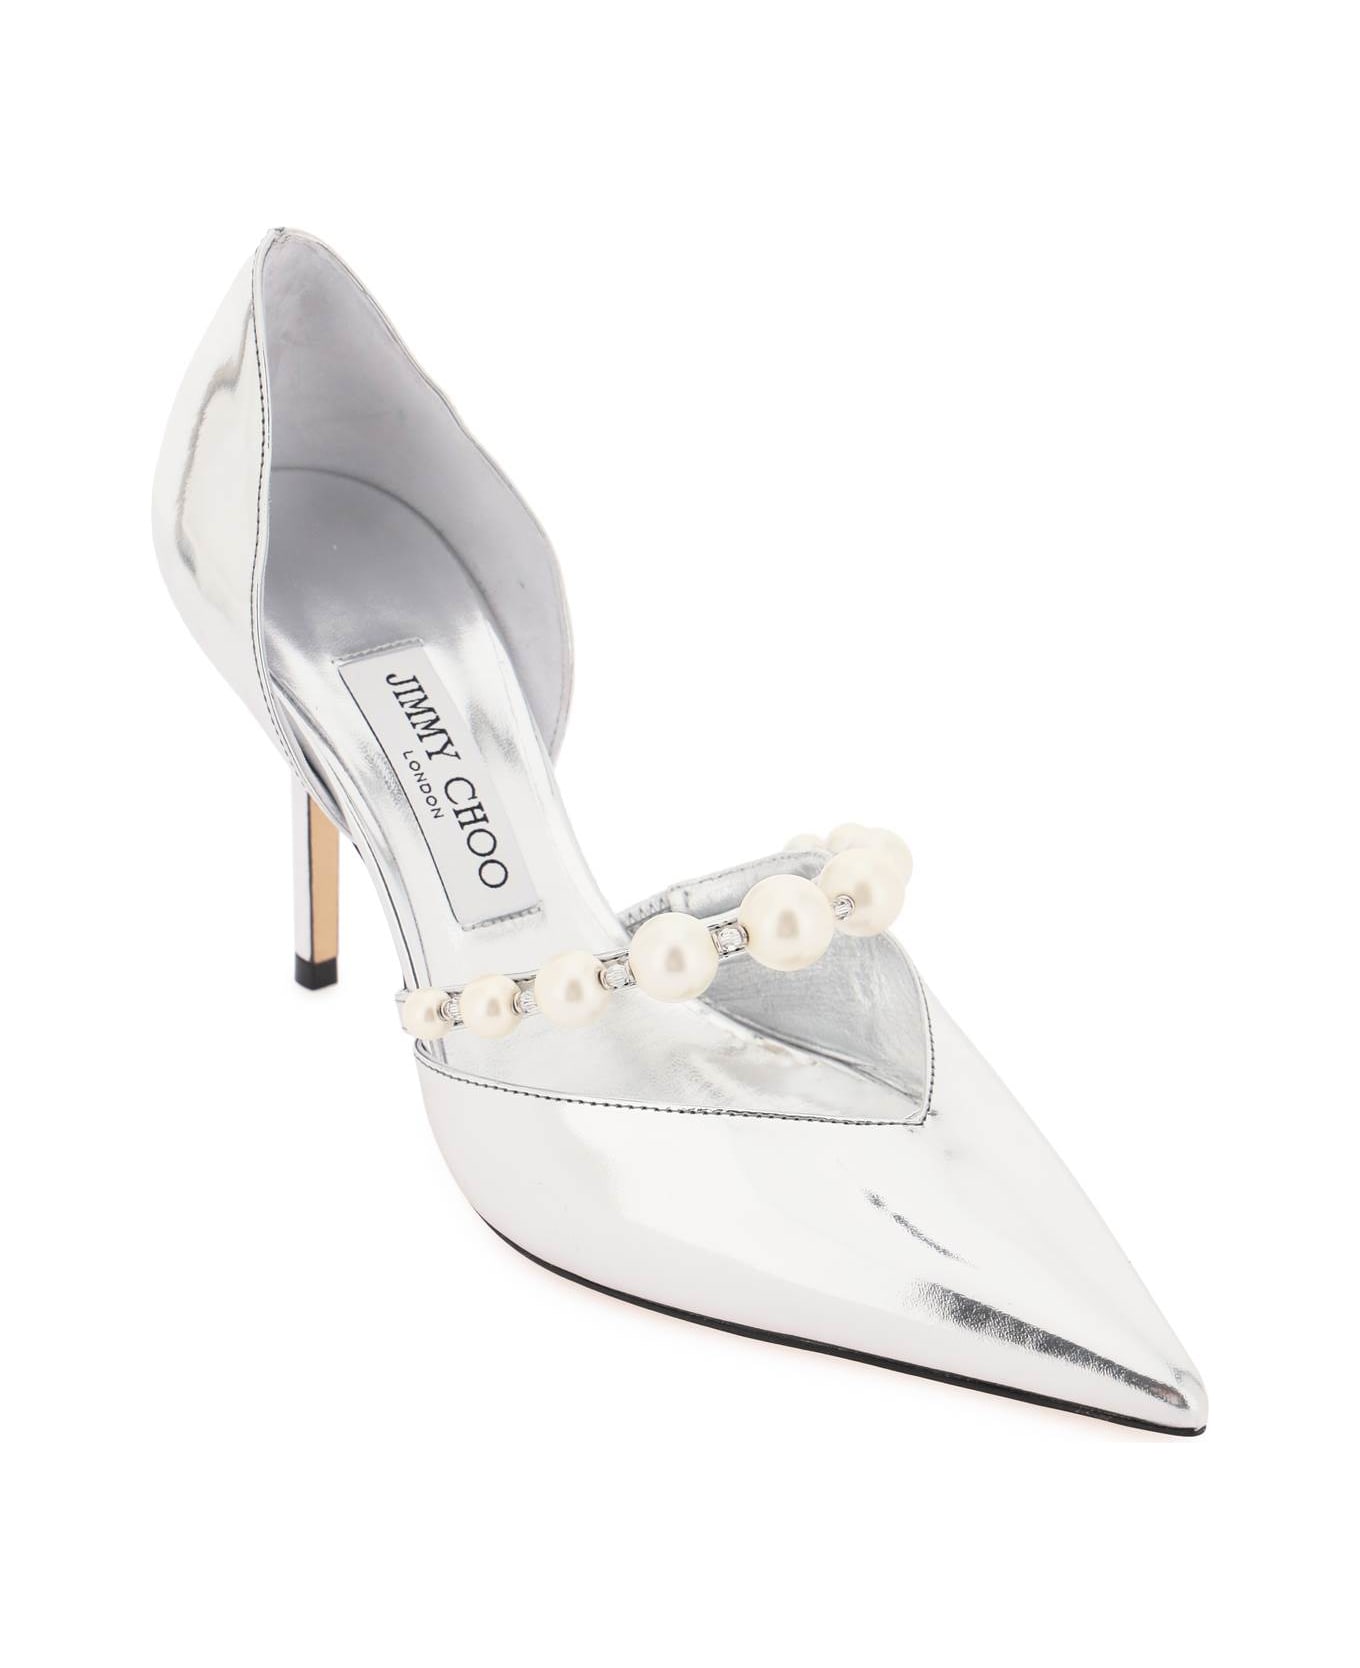 Jimmy Choo Pumps Aurelie 85 With Pearls - SILVER WHITE (Silver) ハイヒール